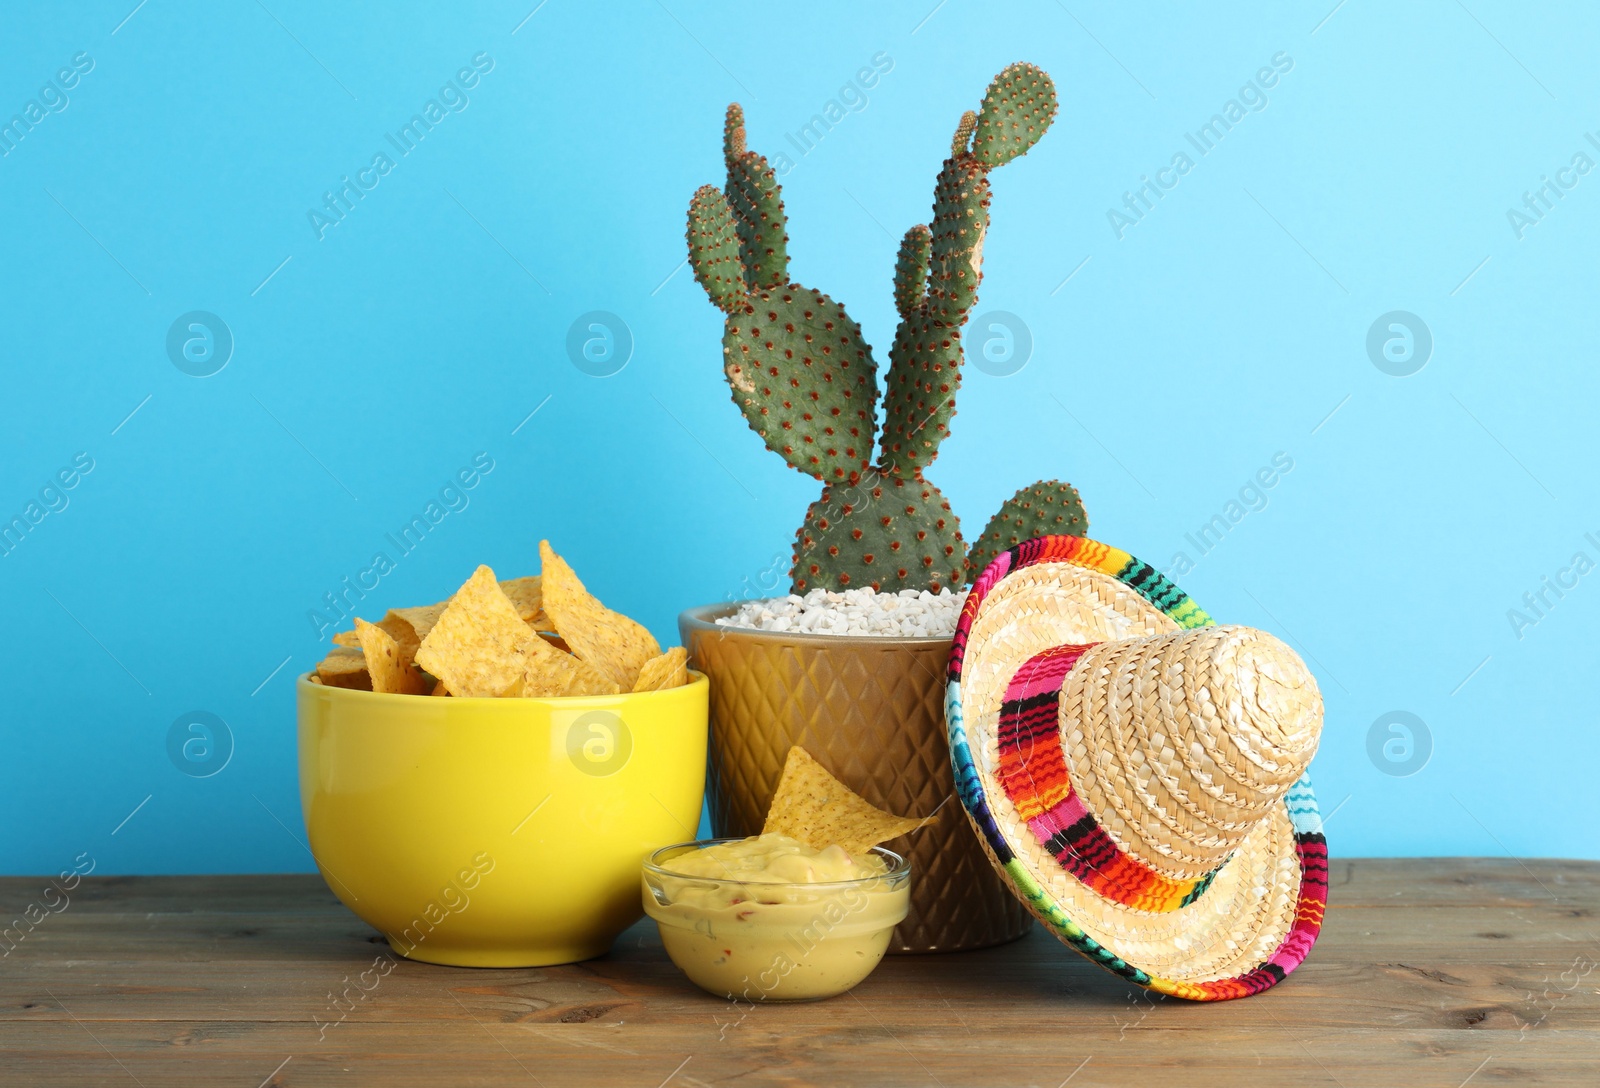 Photo of Mexican sombrero hat, cactus, nachos chips and guacamole in bowls on wooden table against light blue background